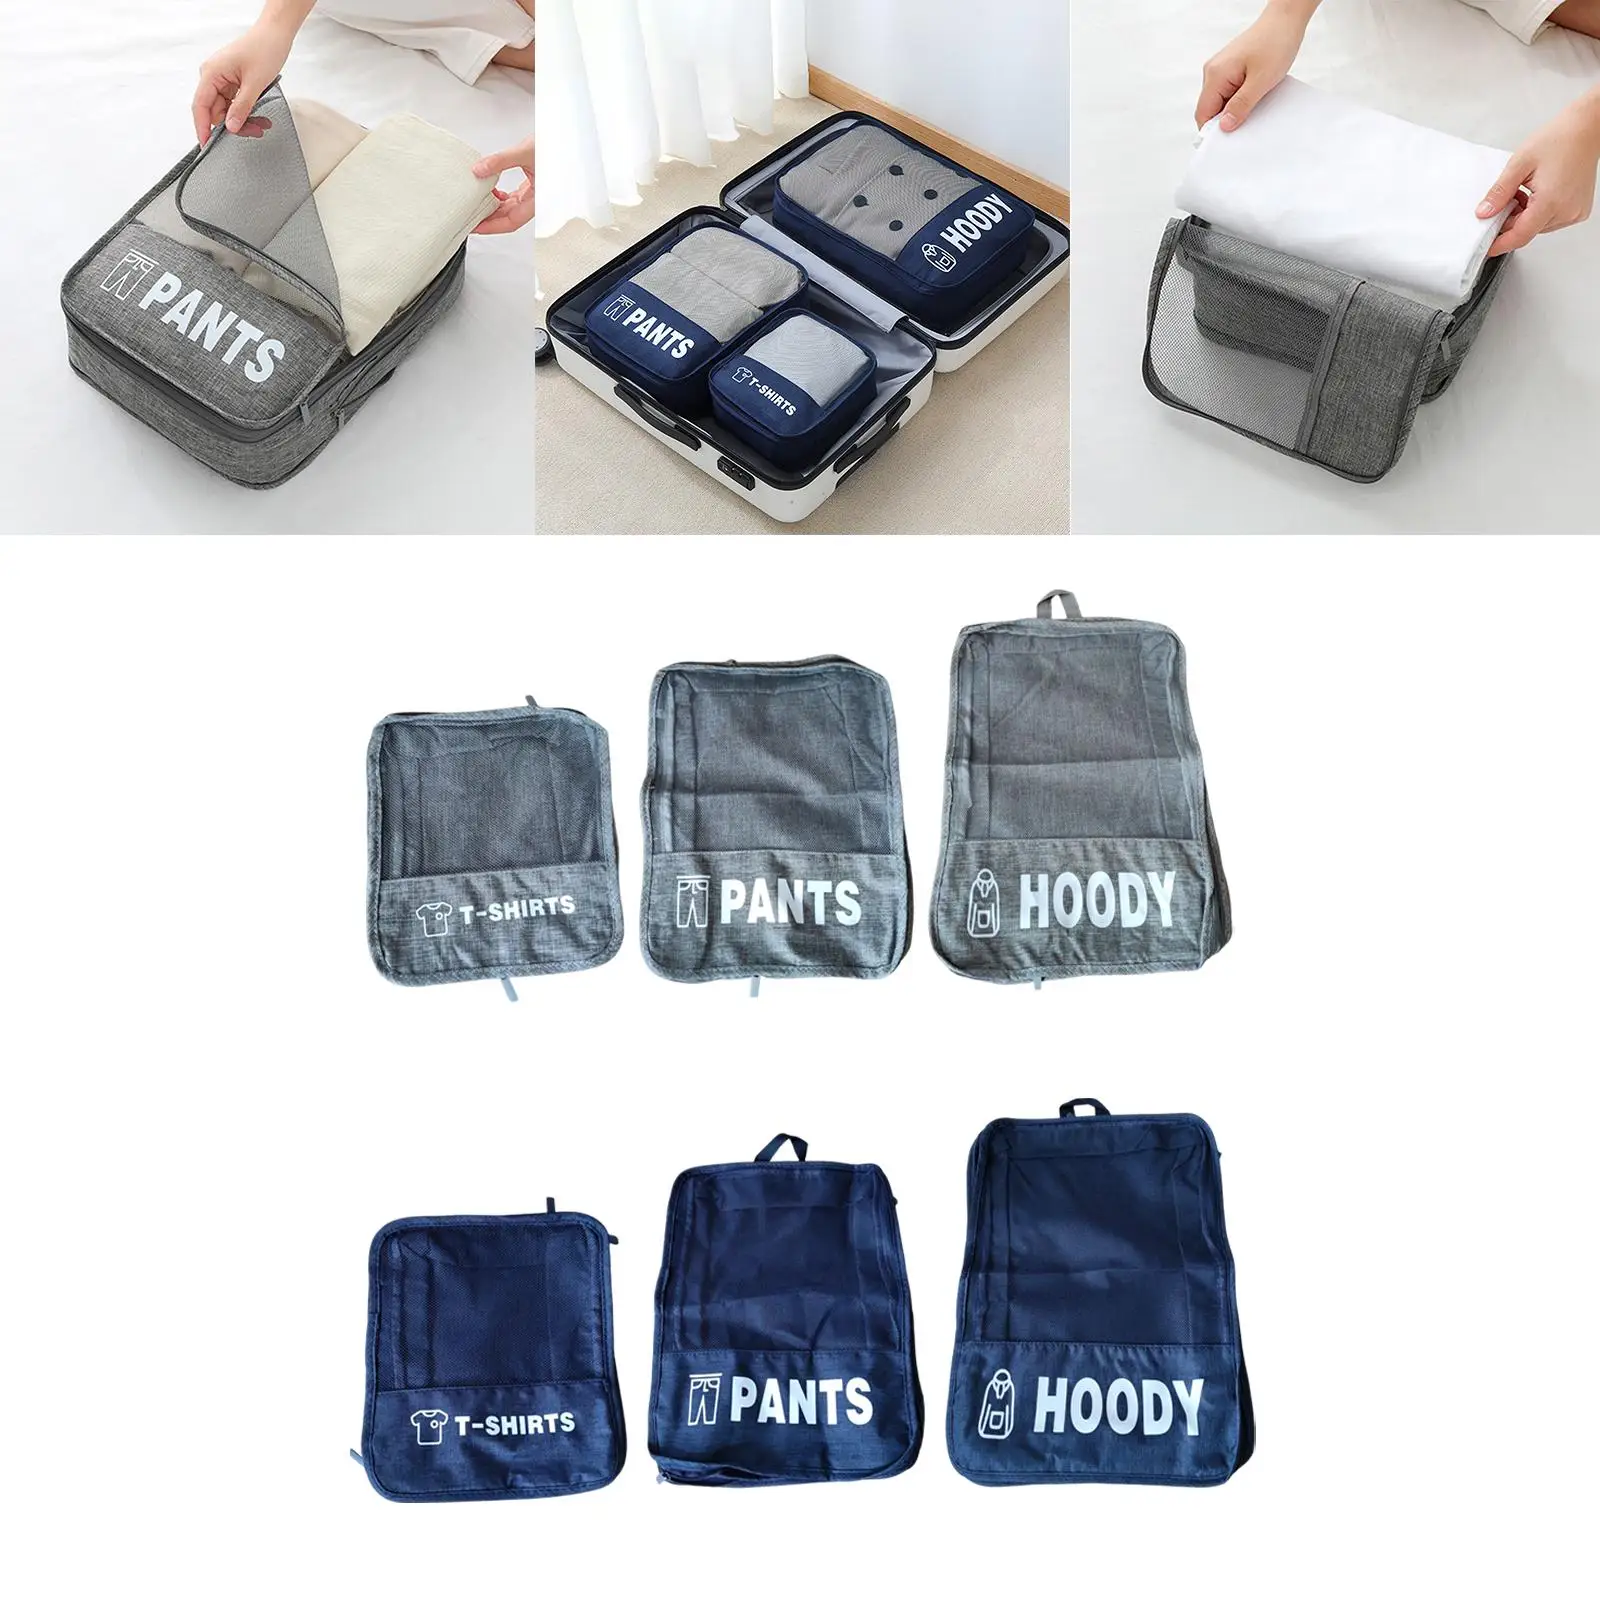 3 Pieces Compression Packing Cubes Expandable Travel Organizer Premium Zippers and Stitching Convenient Luggage Organizers